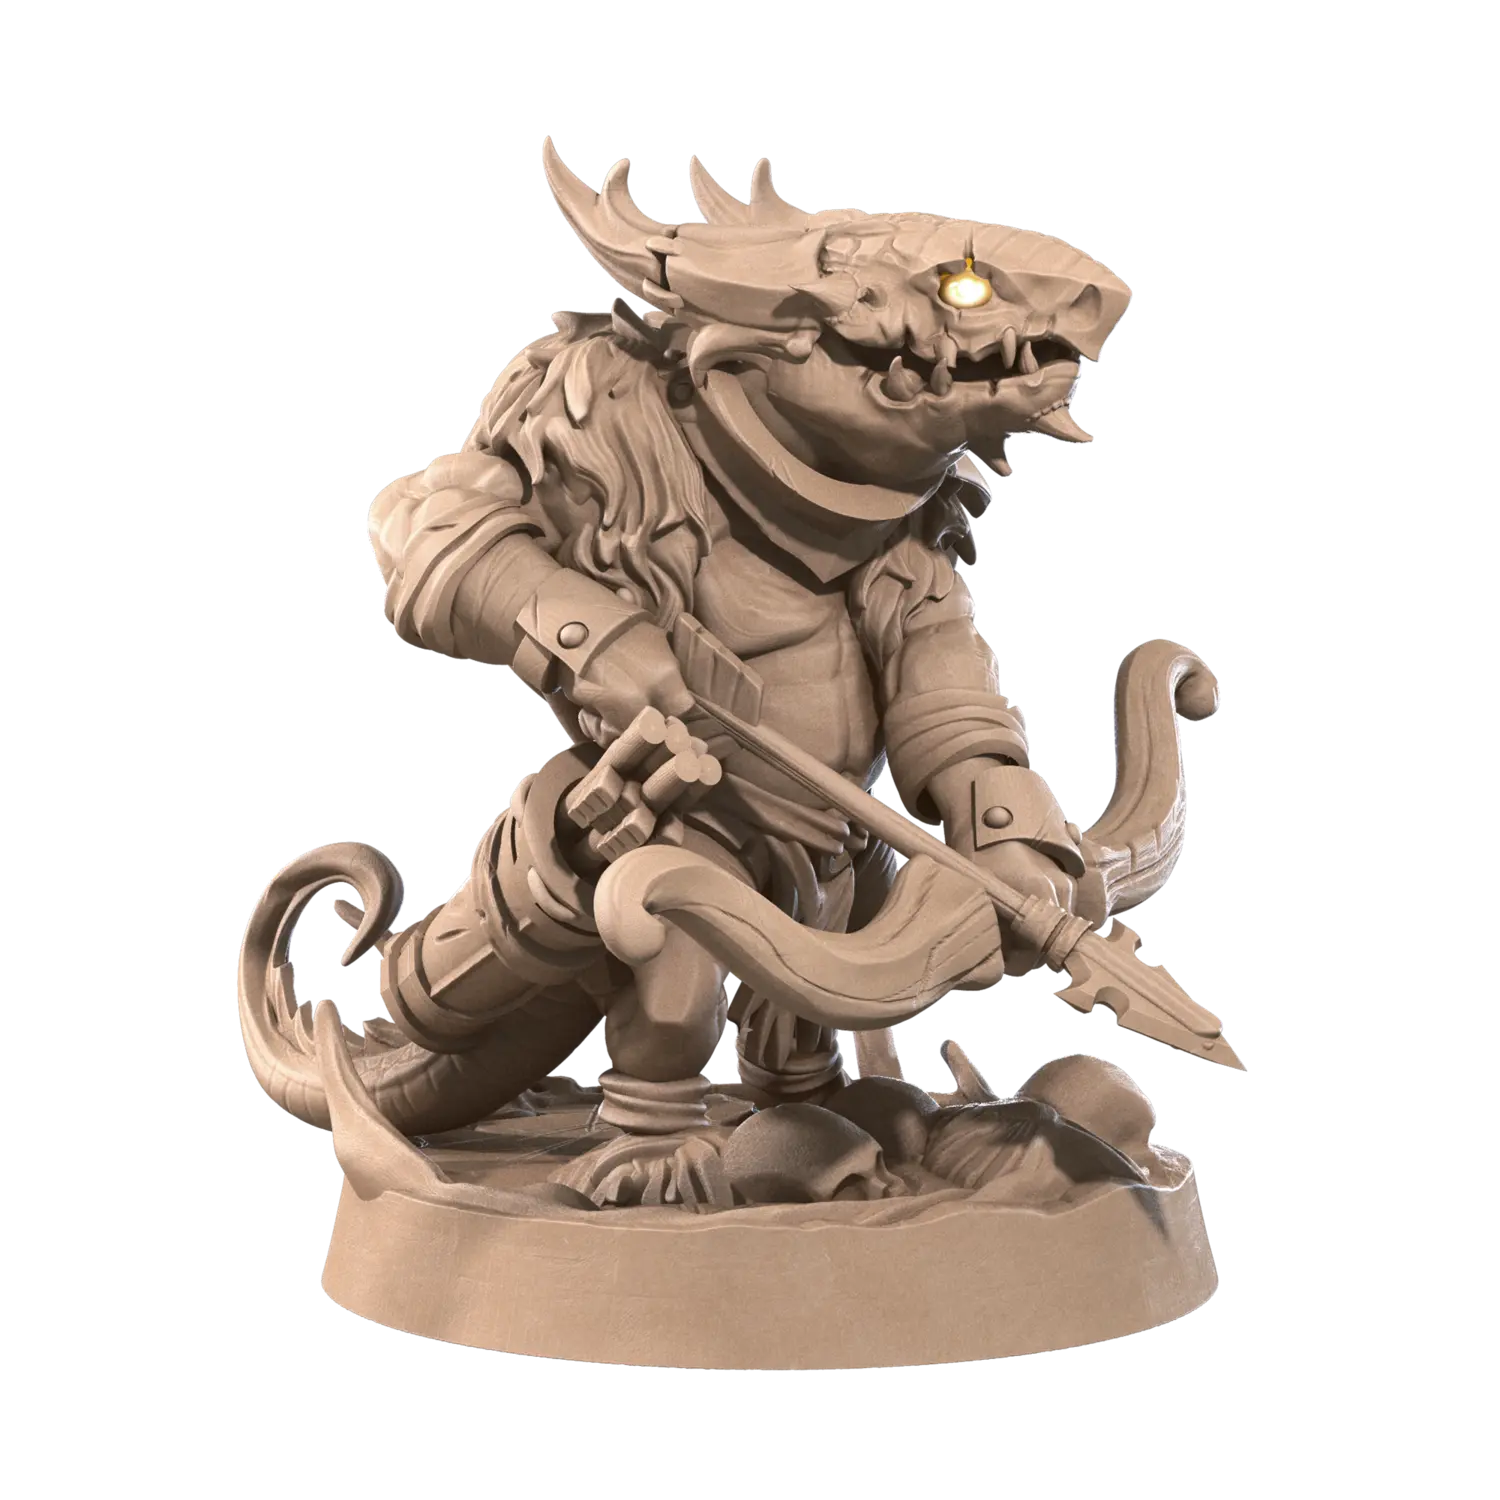 DnD Fighter - Kobold - Miniature - Monsters - Ranger - Rogue Bramble  Fighter - Kobold - Miniature - Monsters - Ranger - Rogue sold by DoubleHitShop